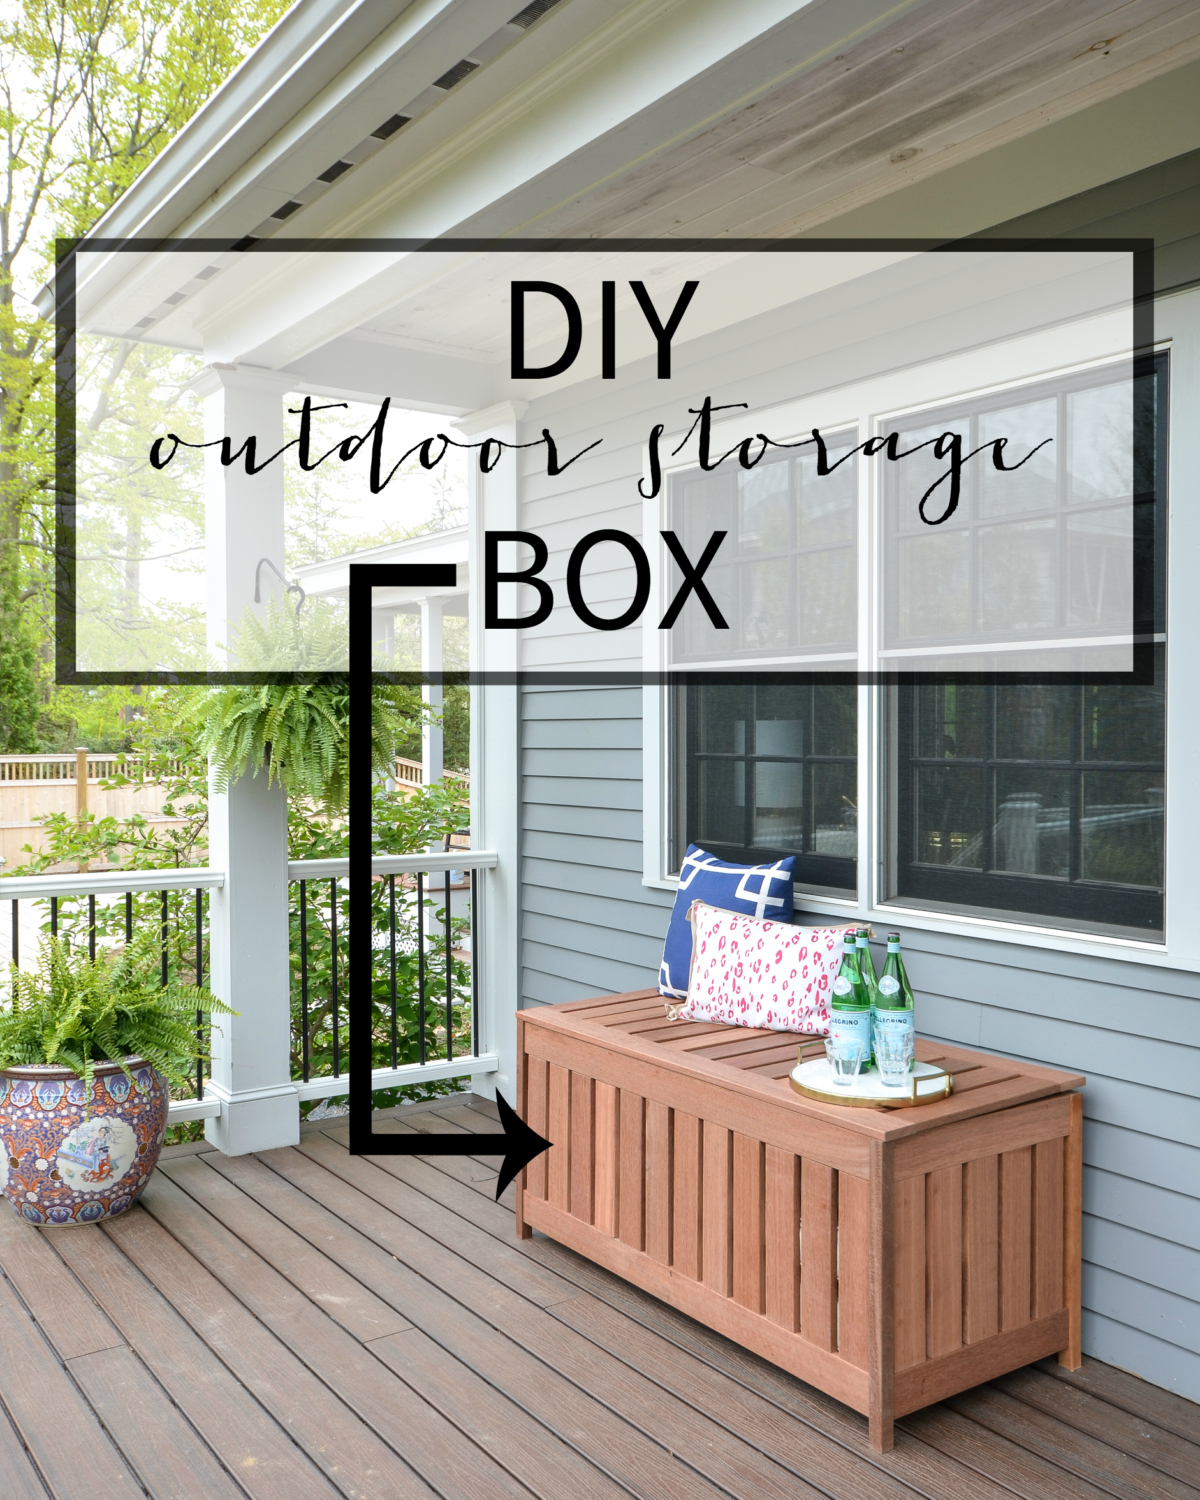 Diy Outdoor Storage Box The Chronicles Of Home throughout sizing 1200 X 1500